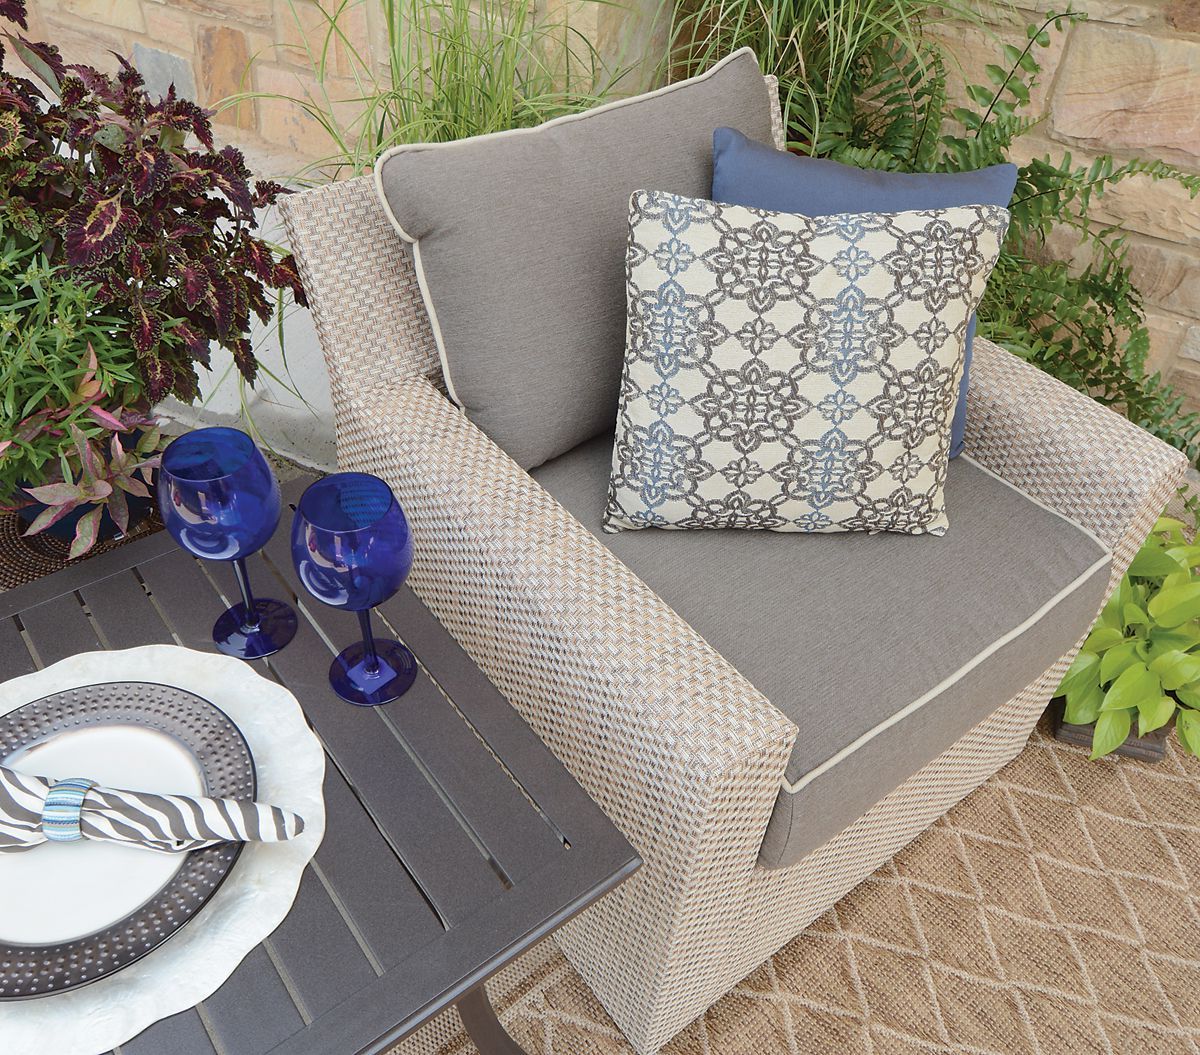 Fabric Outdoor Patio Sets Throughout Current Calming Outdoor Space Www (View 13 of 15)